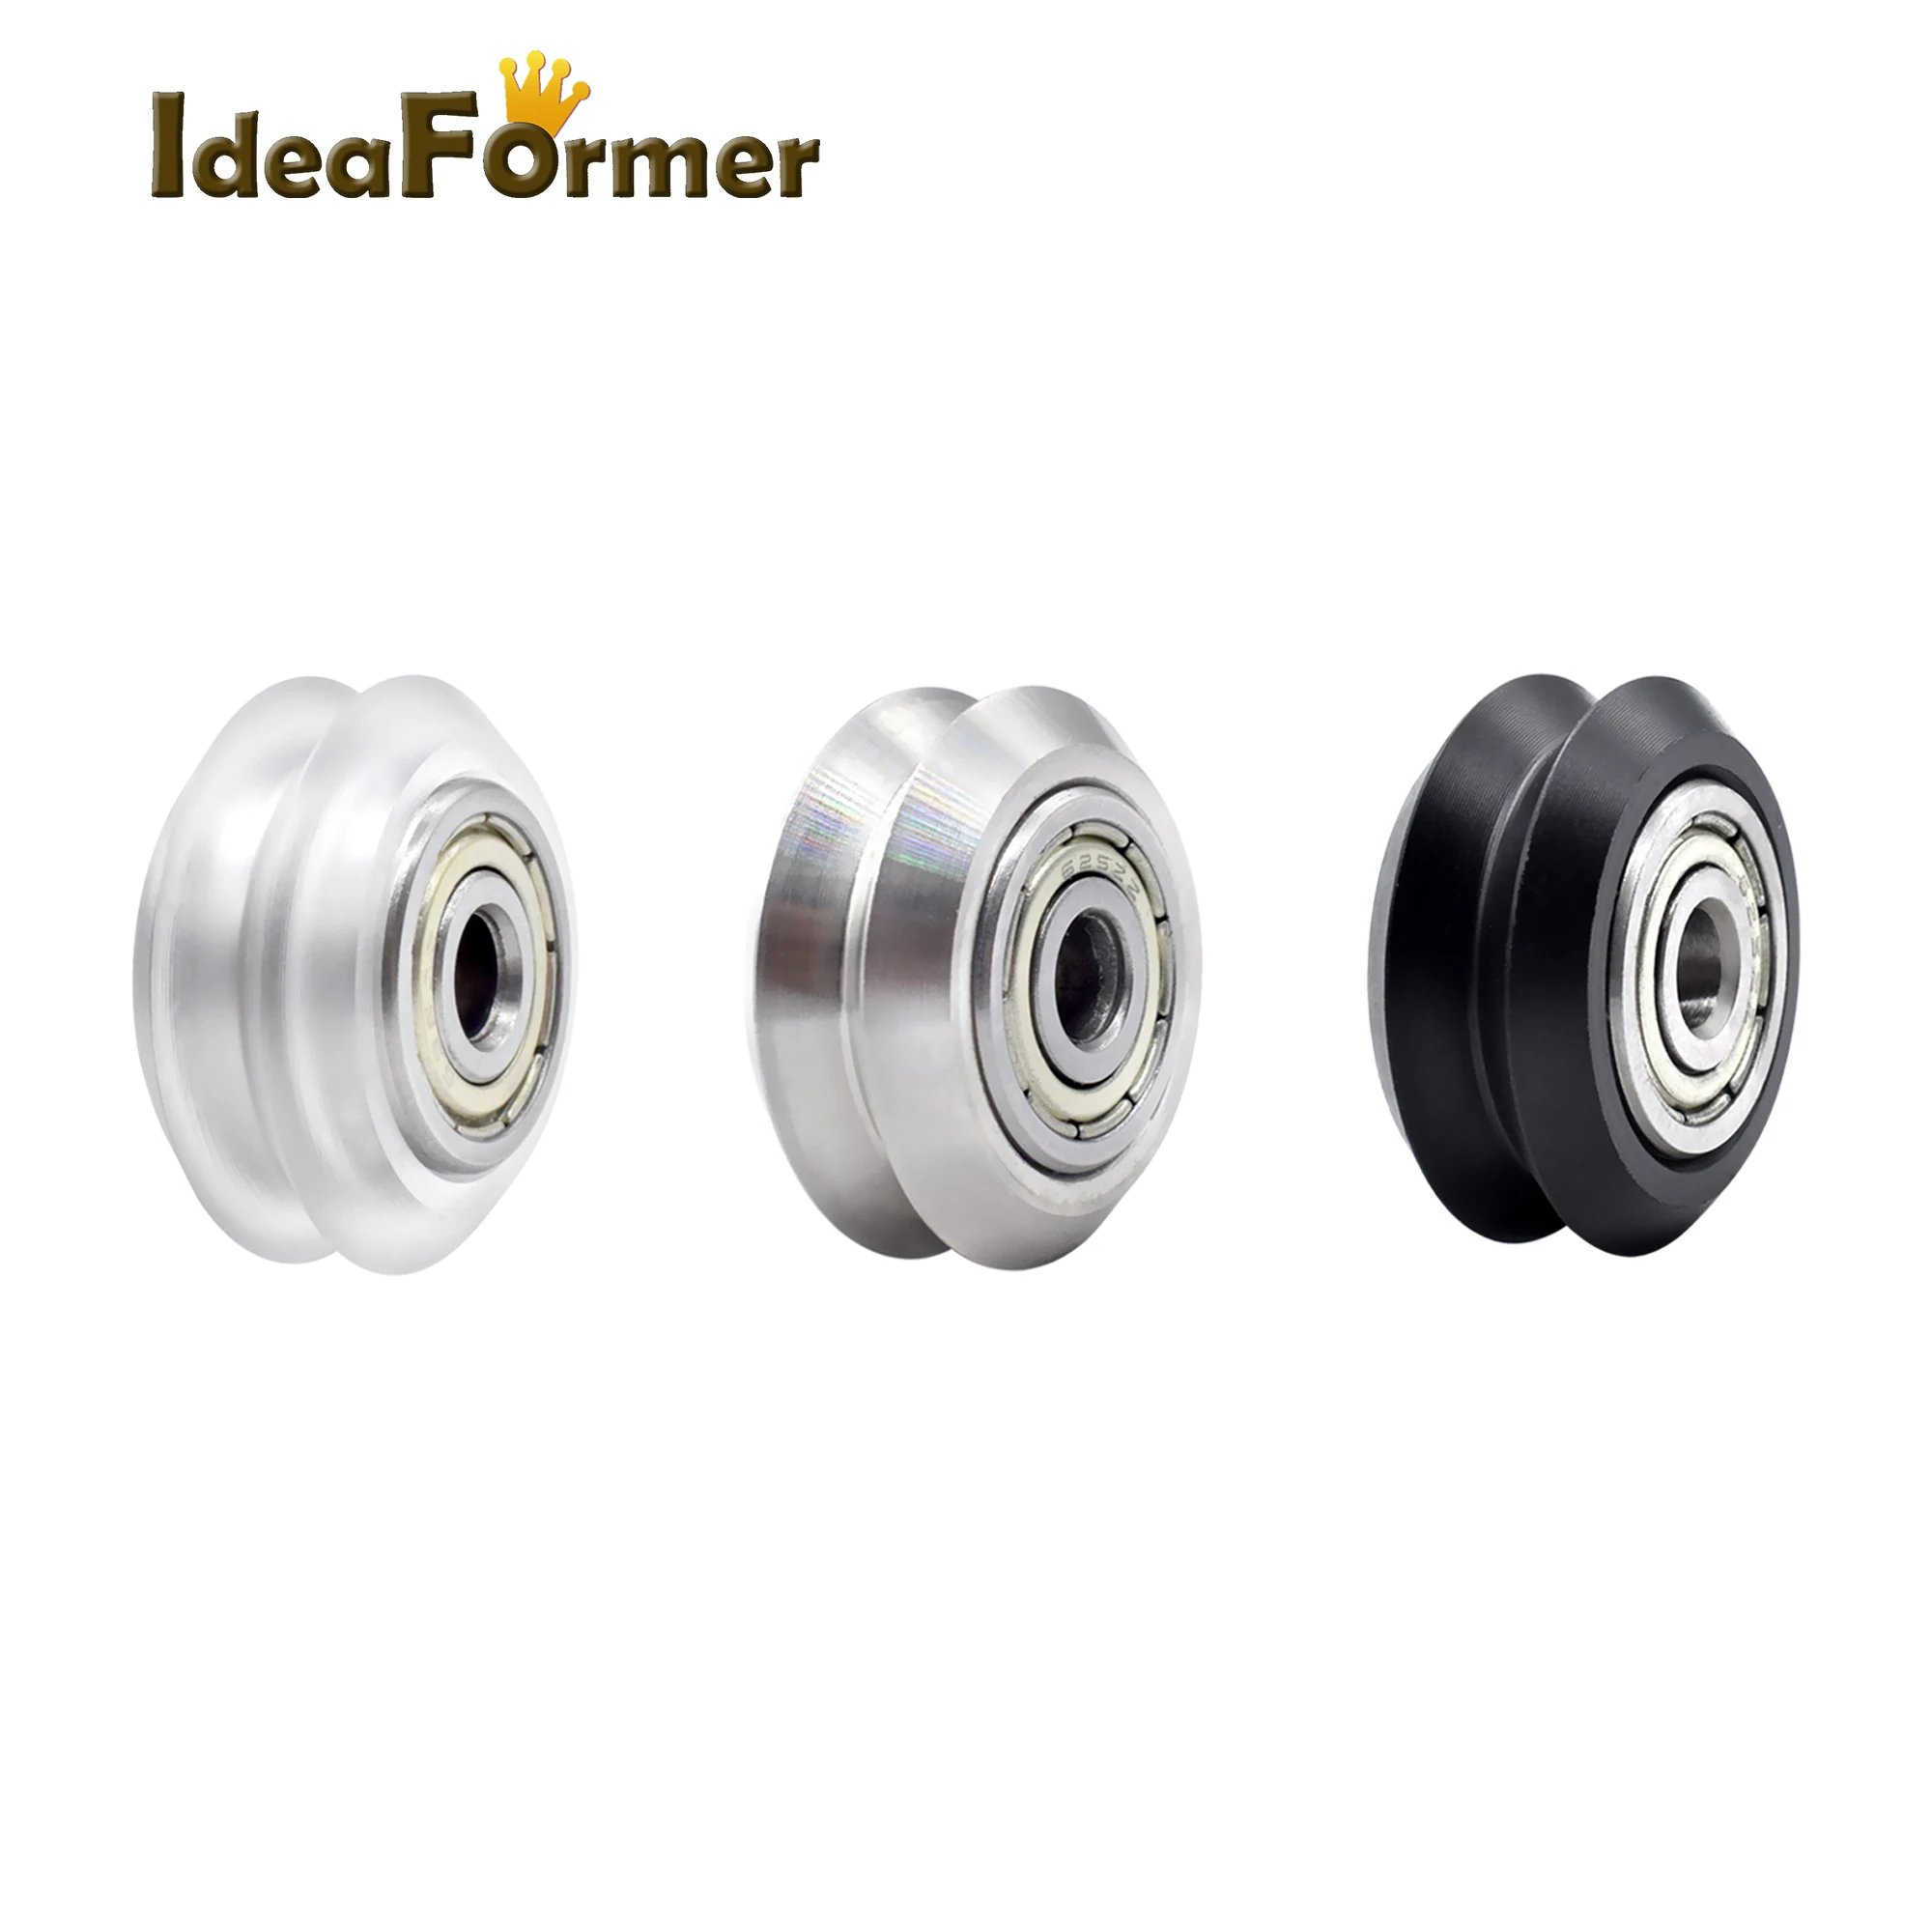 3D Printer Pulley,20pcs V-Shape Groove Wheel 5mm Bore 625 Bearing Pulley Accessories for CNC 3D Printer 